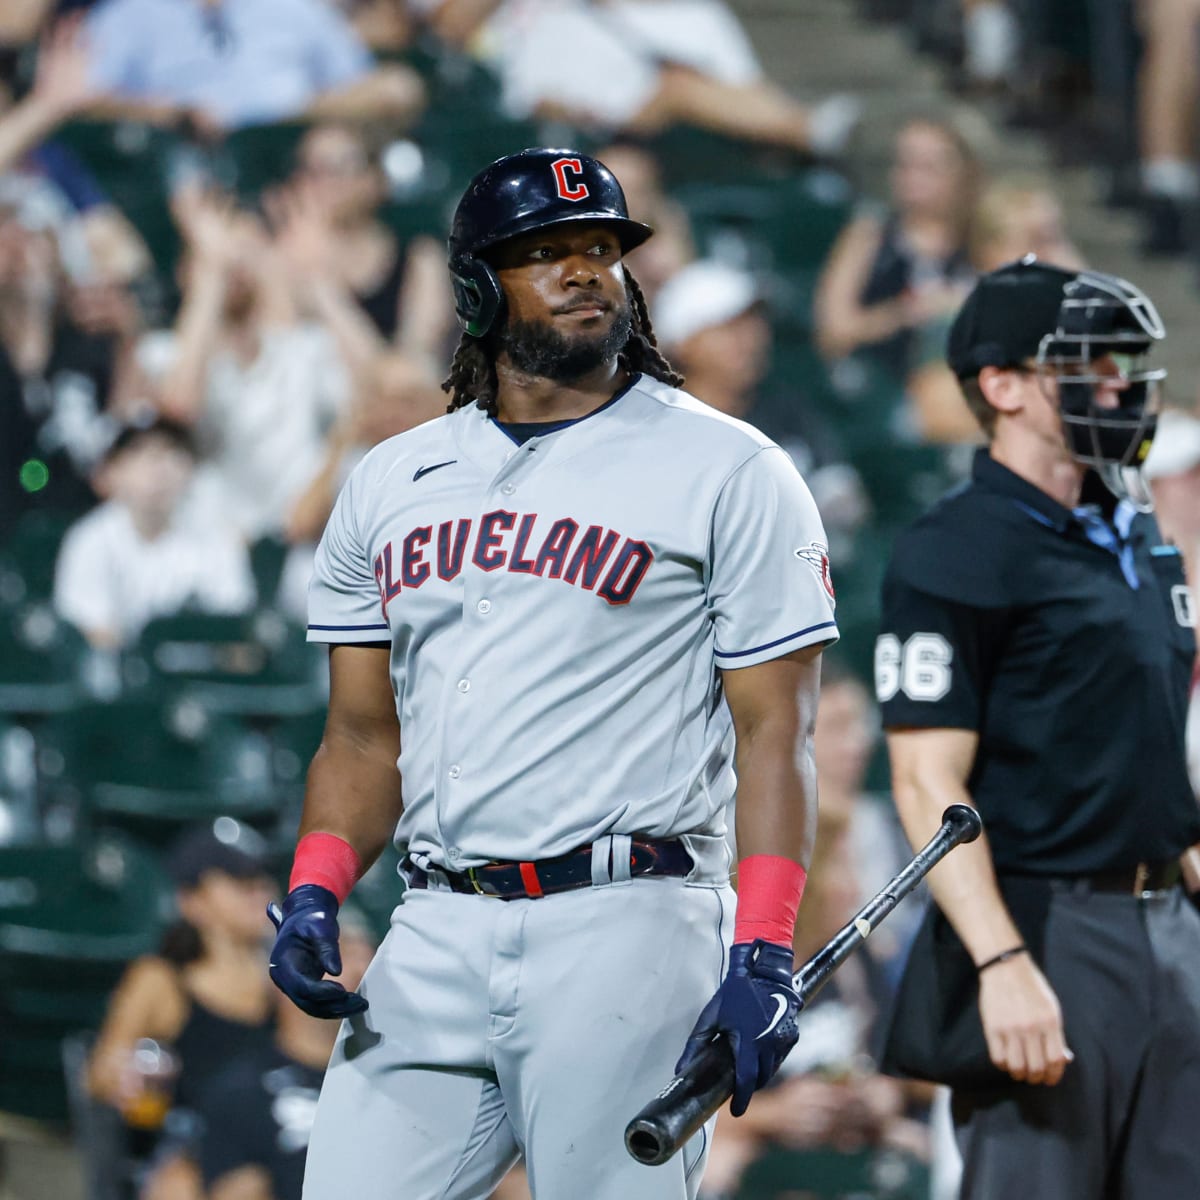 Cleveland's Baseball Team Goes from Indians to Guardians, Chicago News